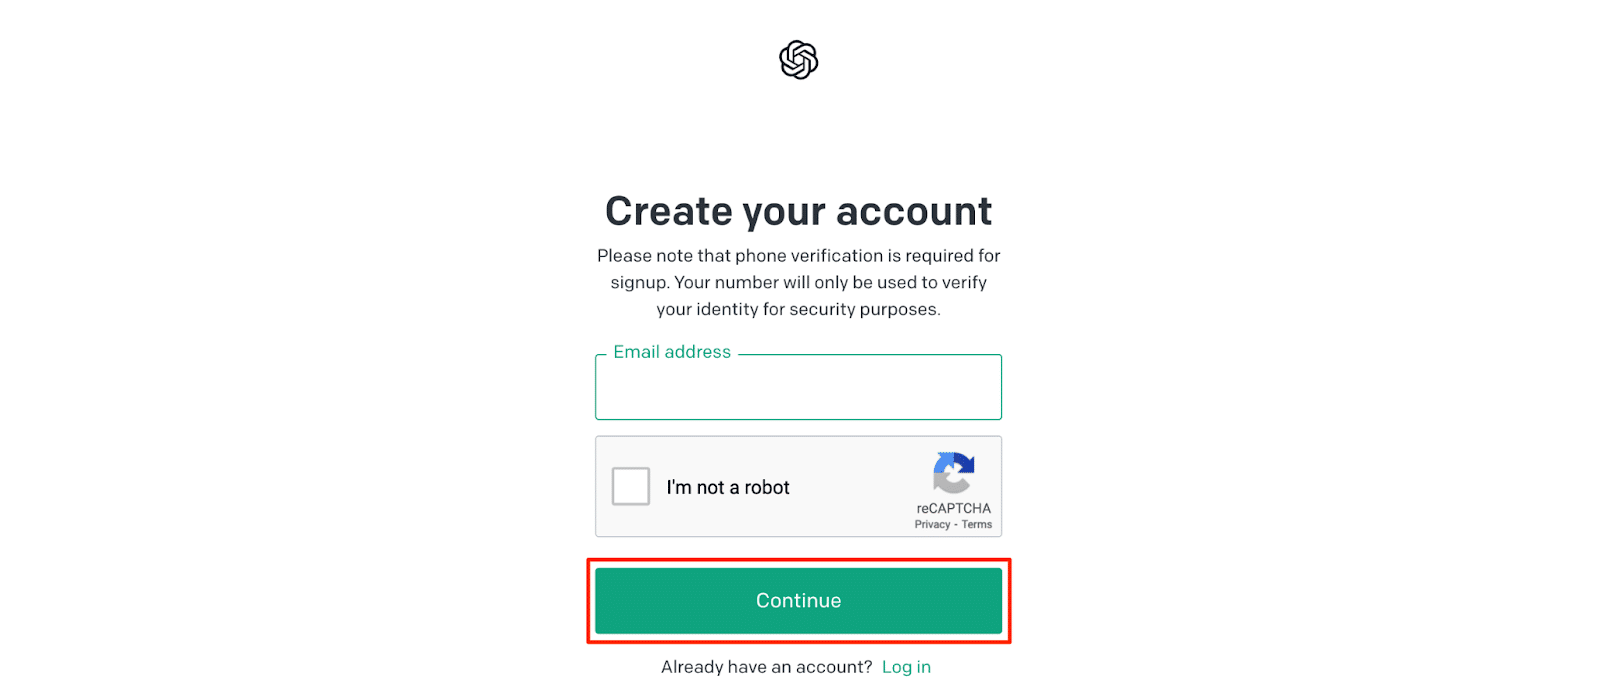 Fill out the form to create your account and click "Continue"